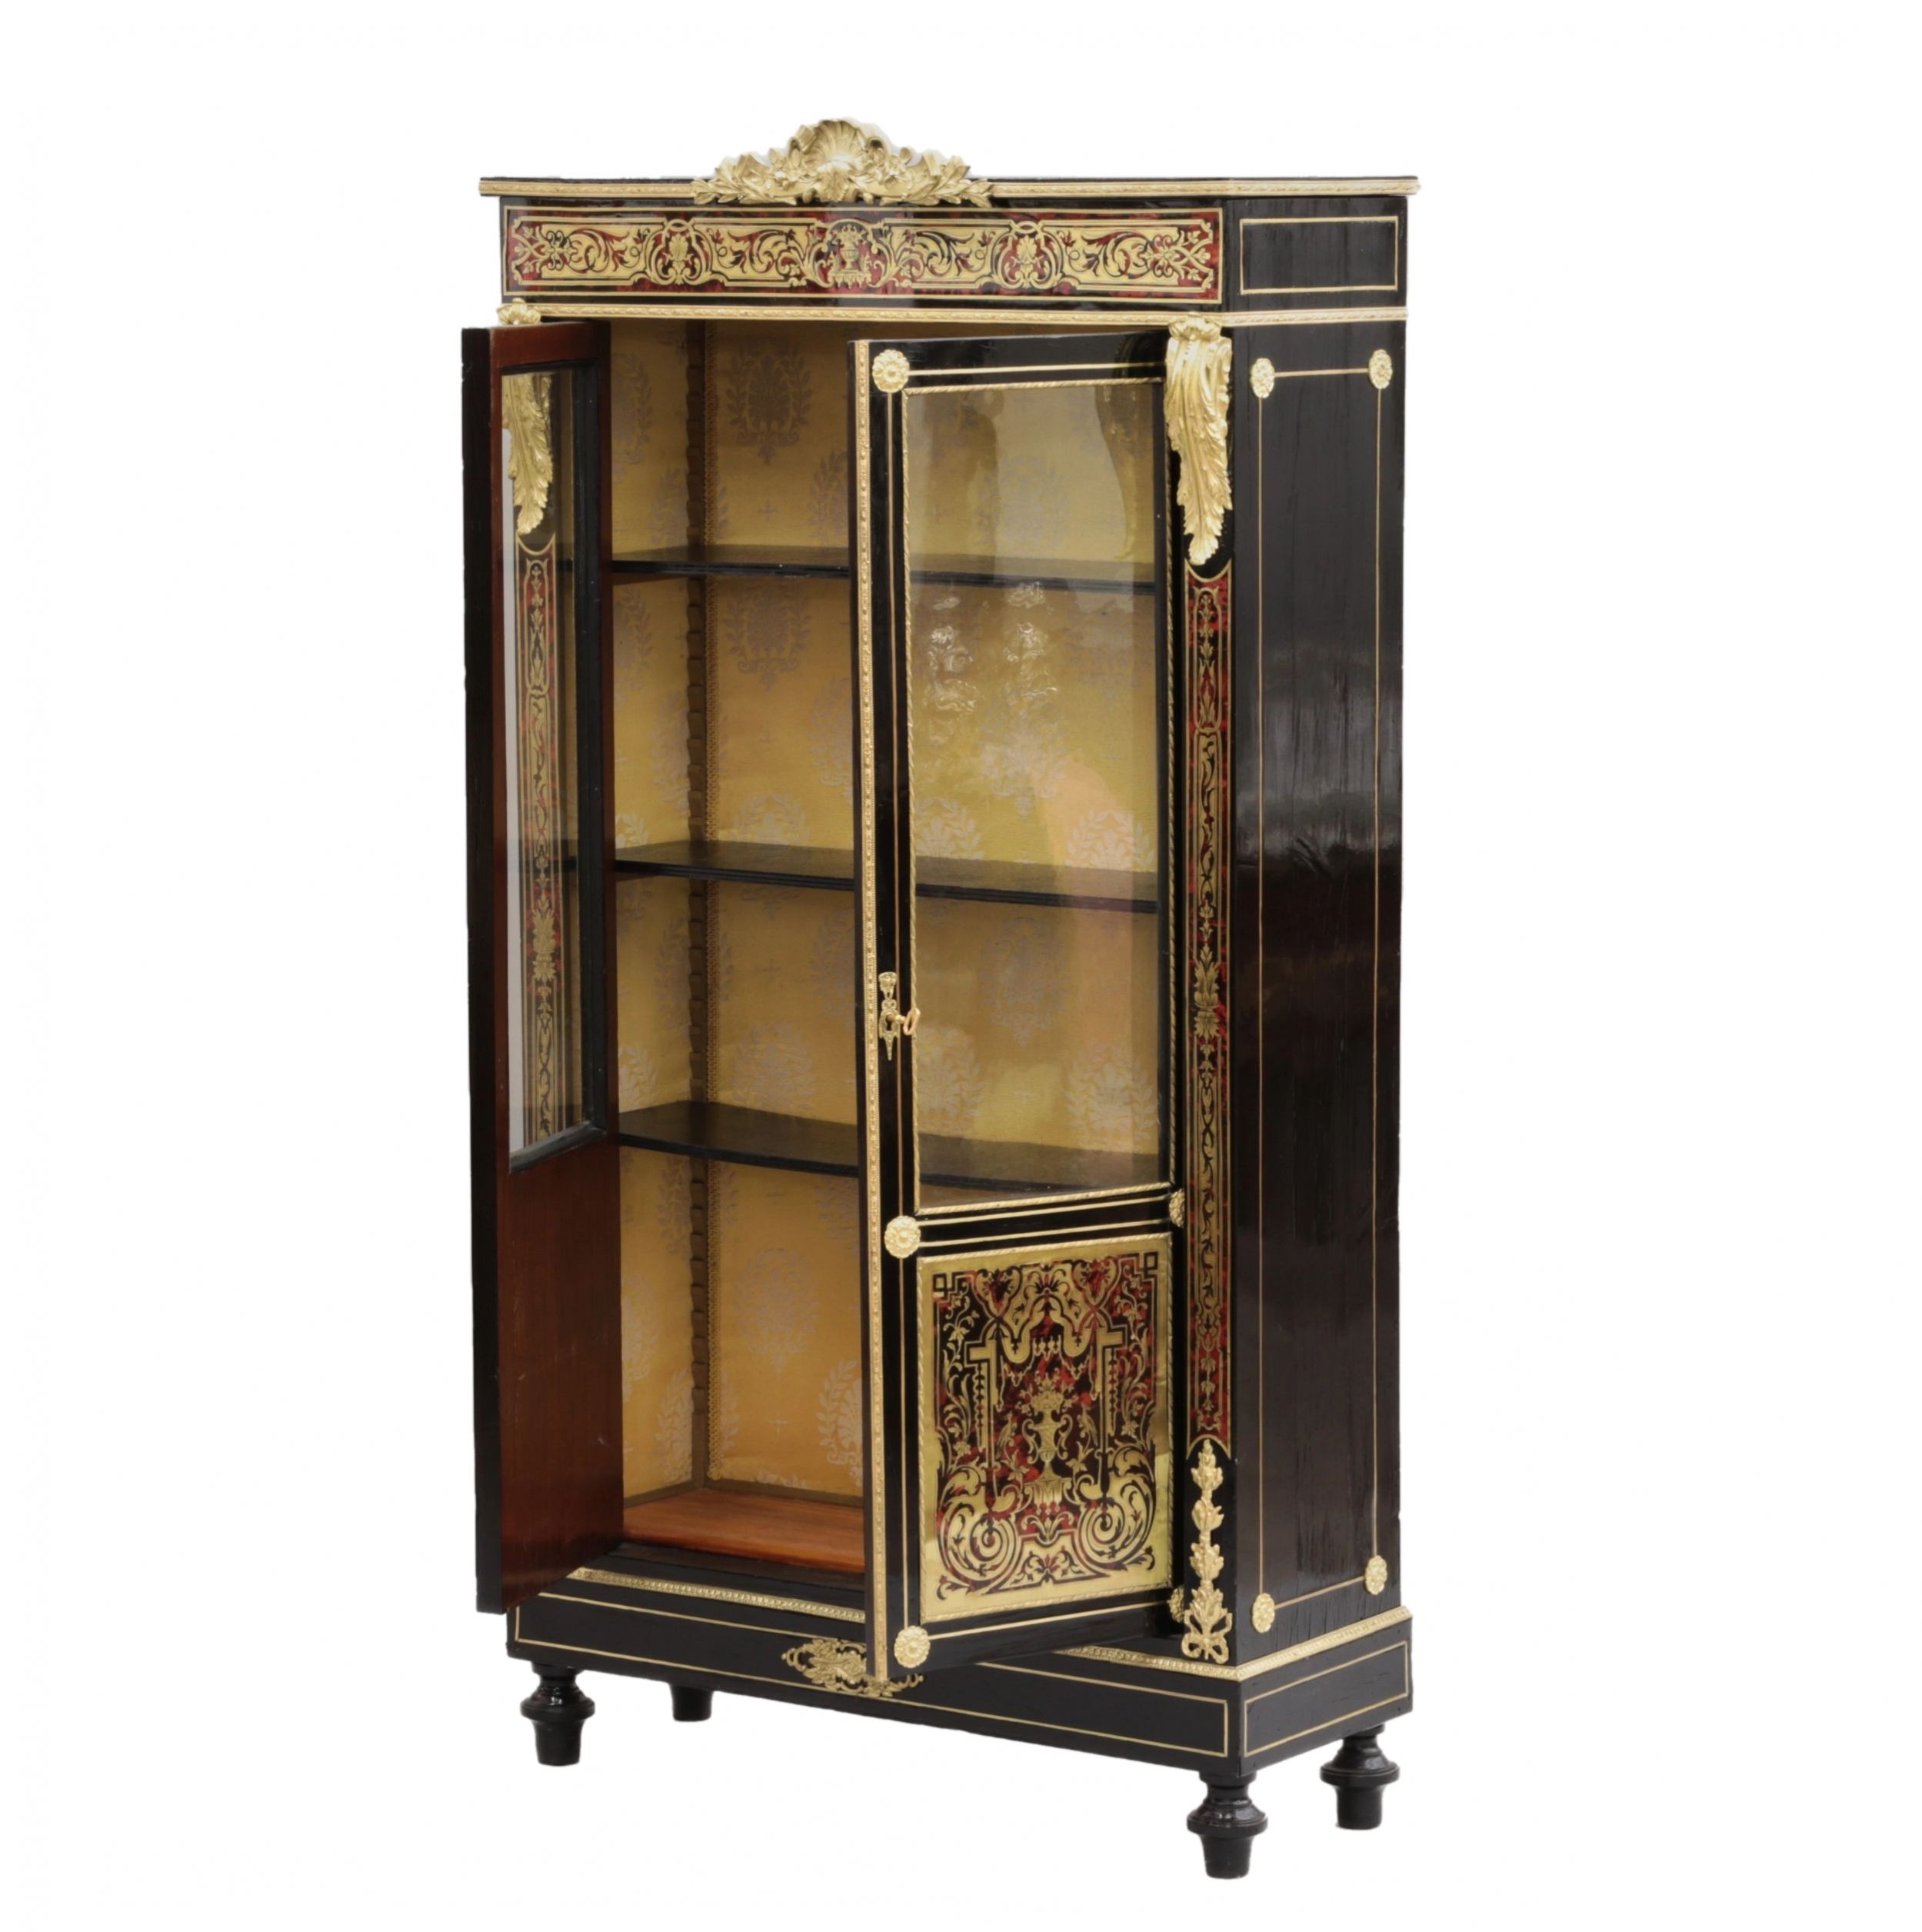 Showcase in Boulle style. 19th century. - Image 3 of 6